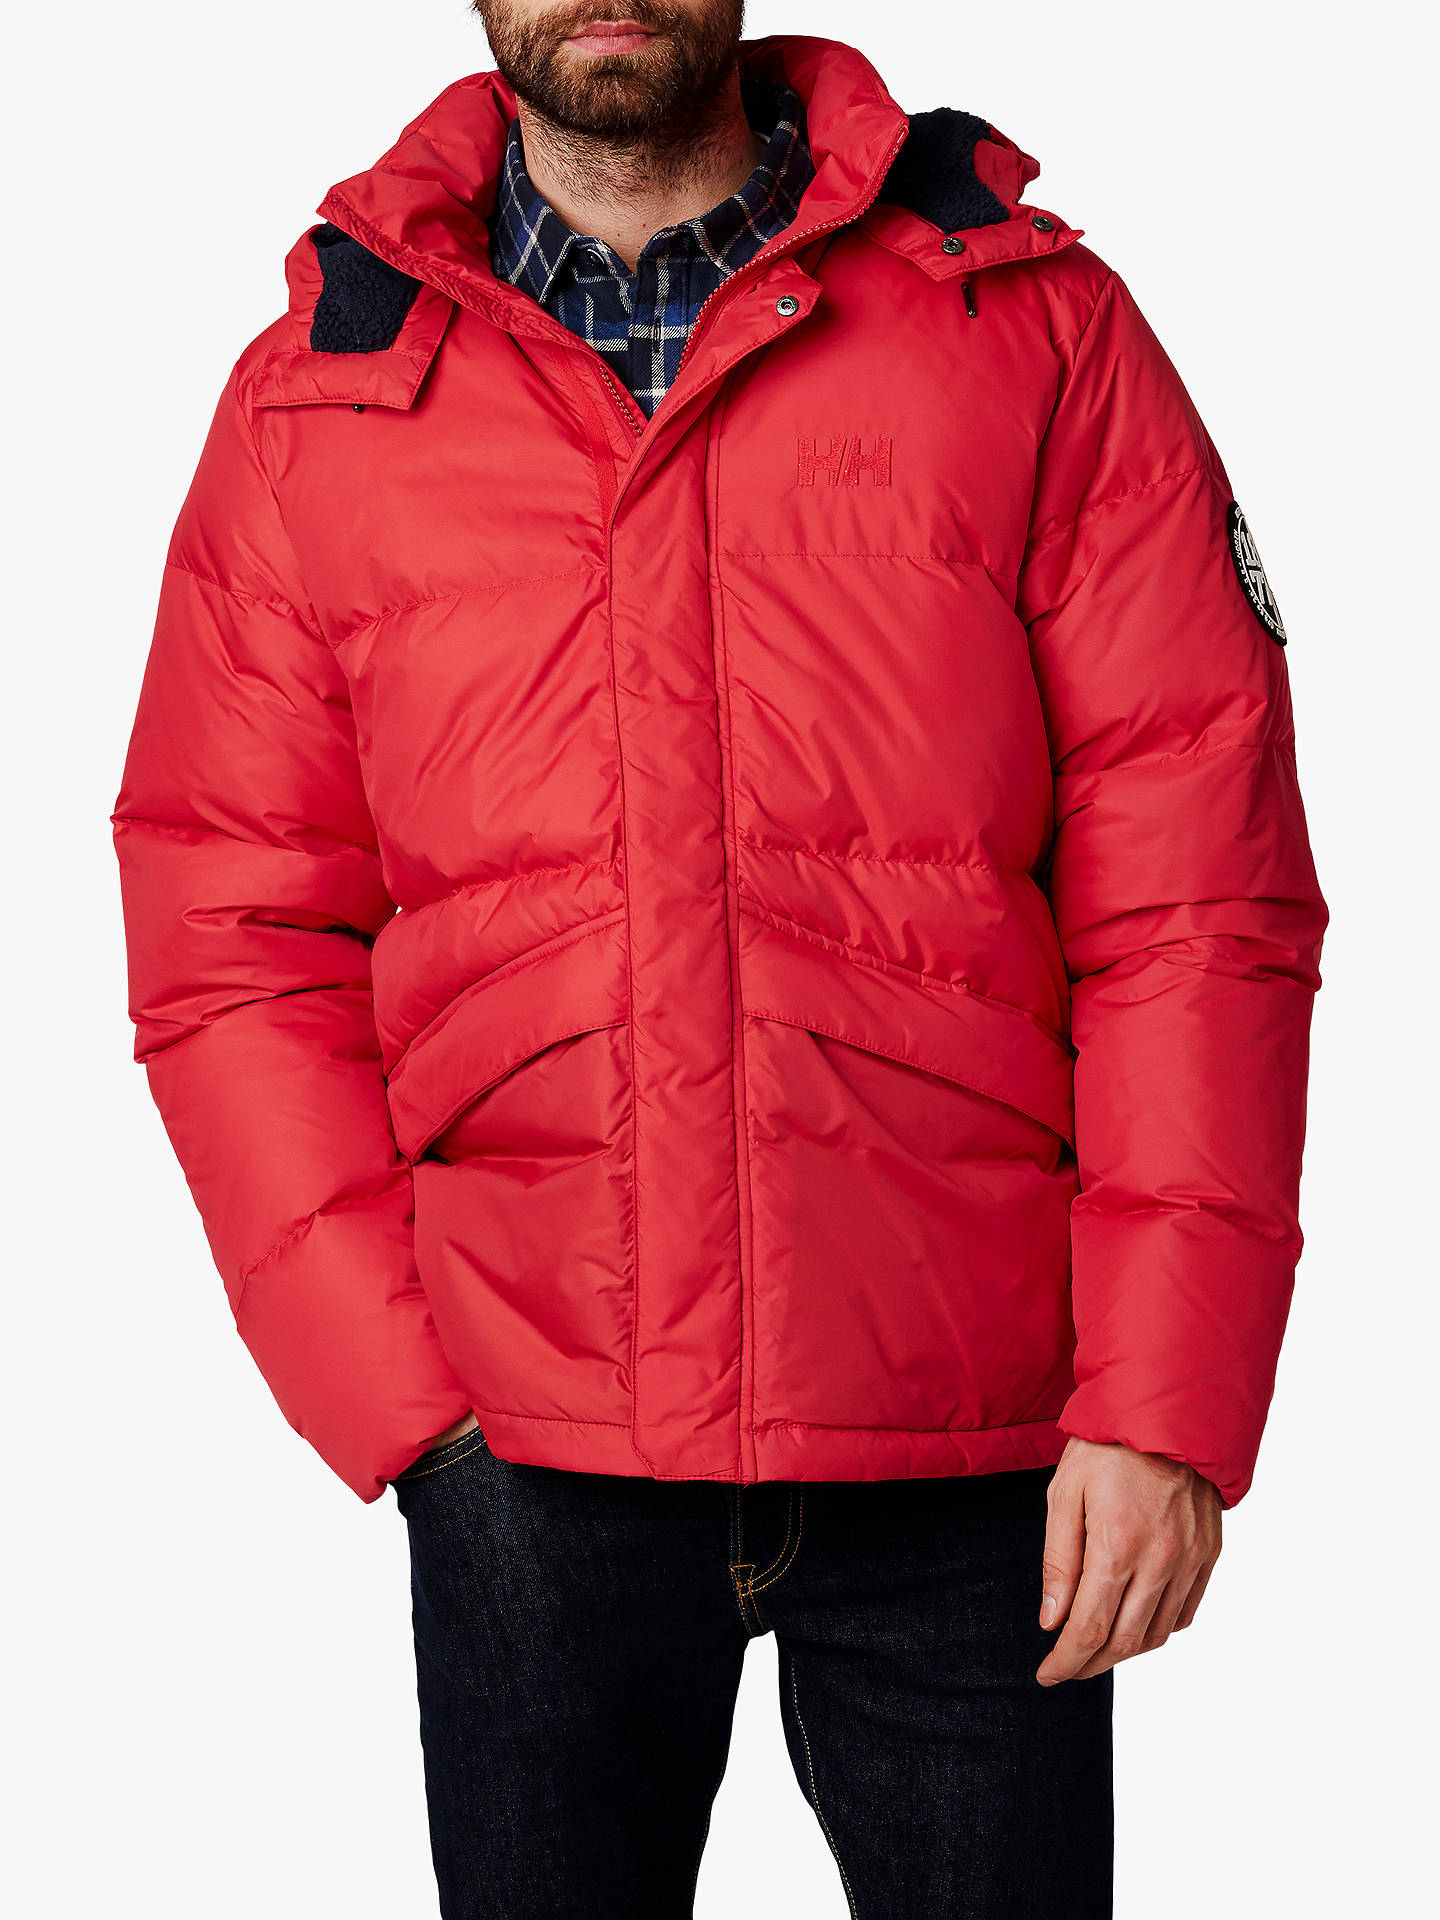 Helly Hansen 1877 Down Men's Insulated Jacket at John Lewis & Partners